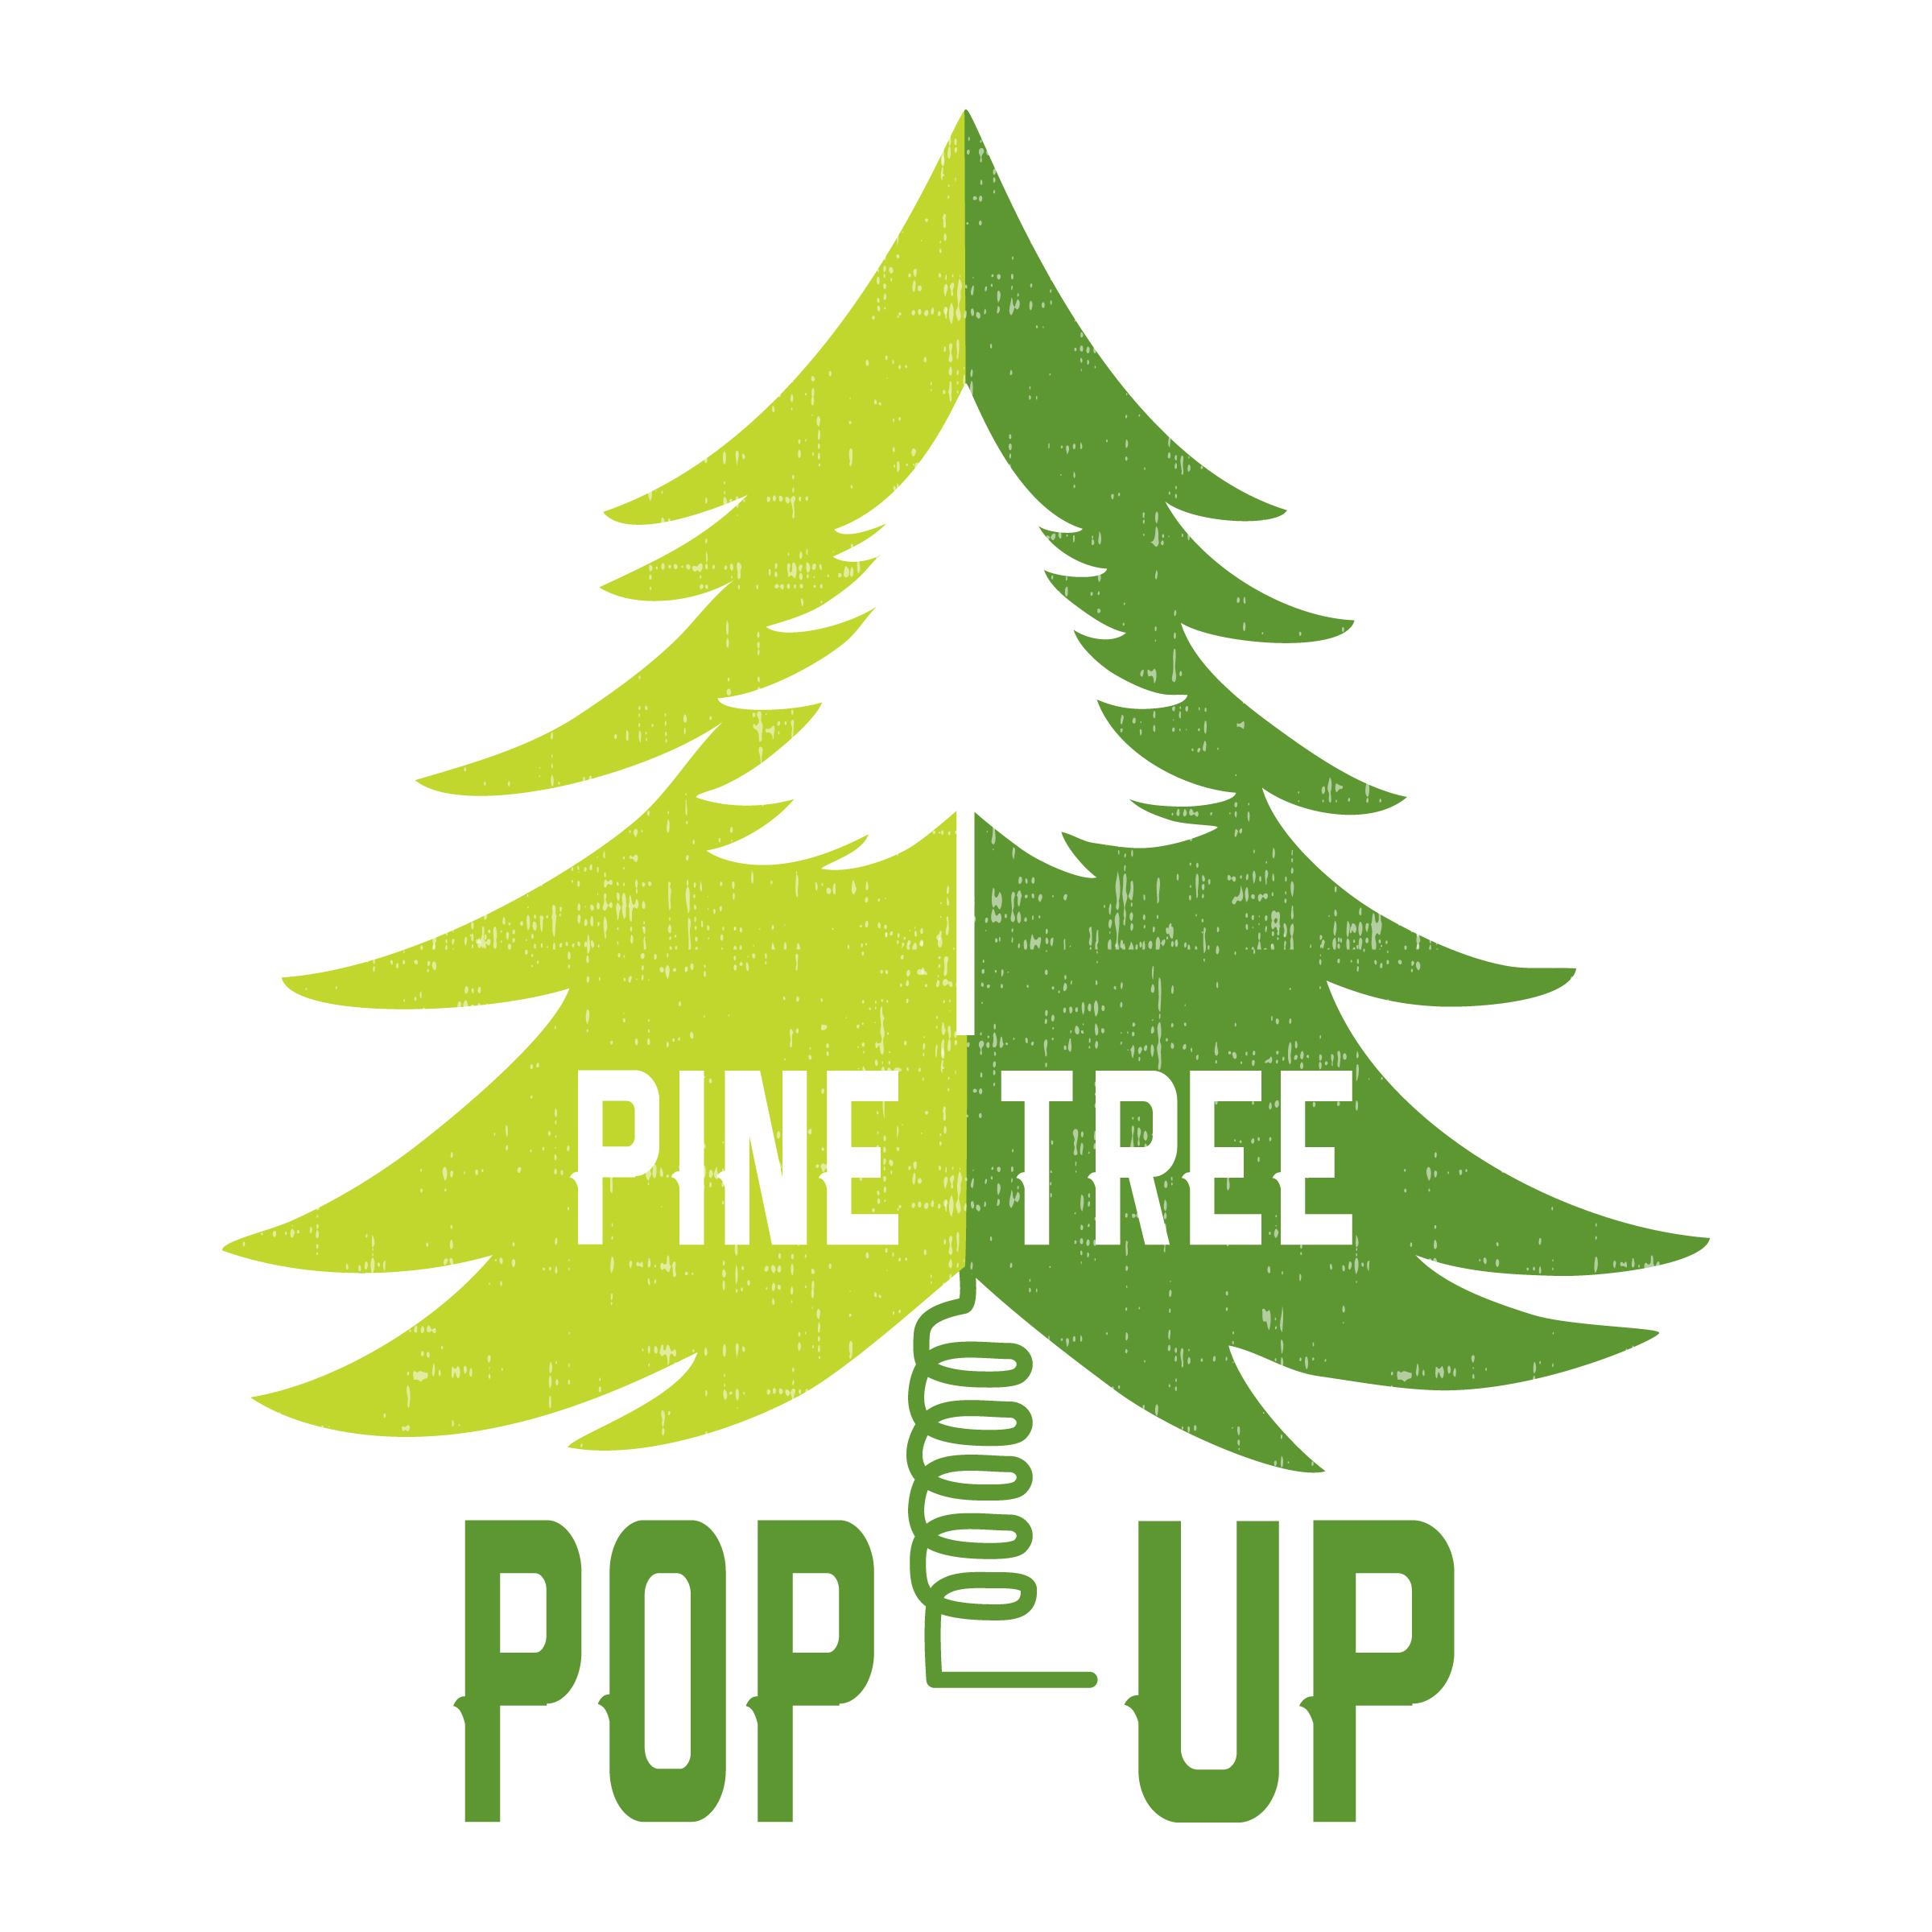 Pine Tree Maine Logo - Pine Tree Pop-Up will be at Pop Up on Maine Art Hill at 5 Chase Hill ...